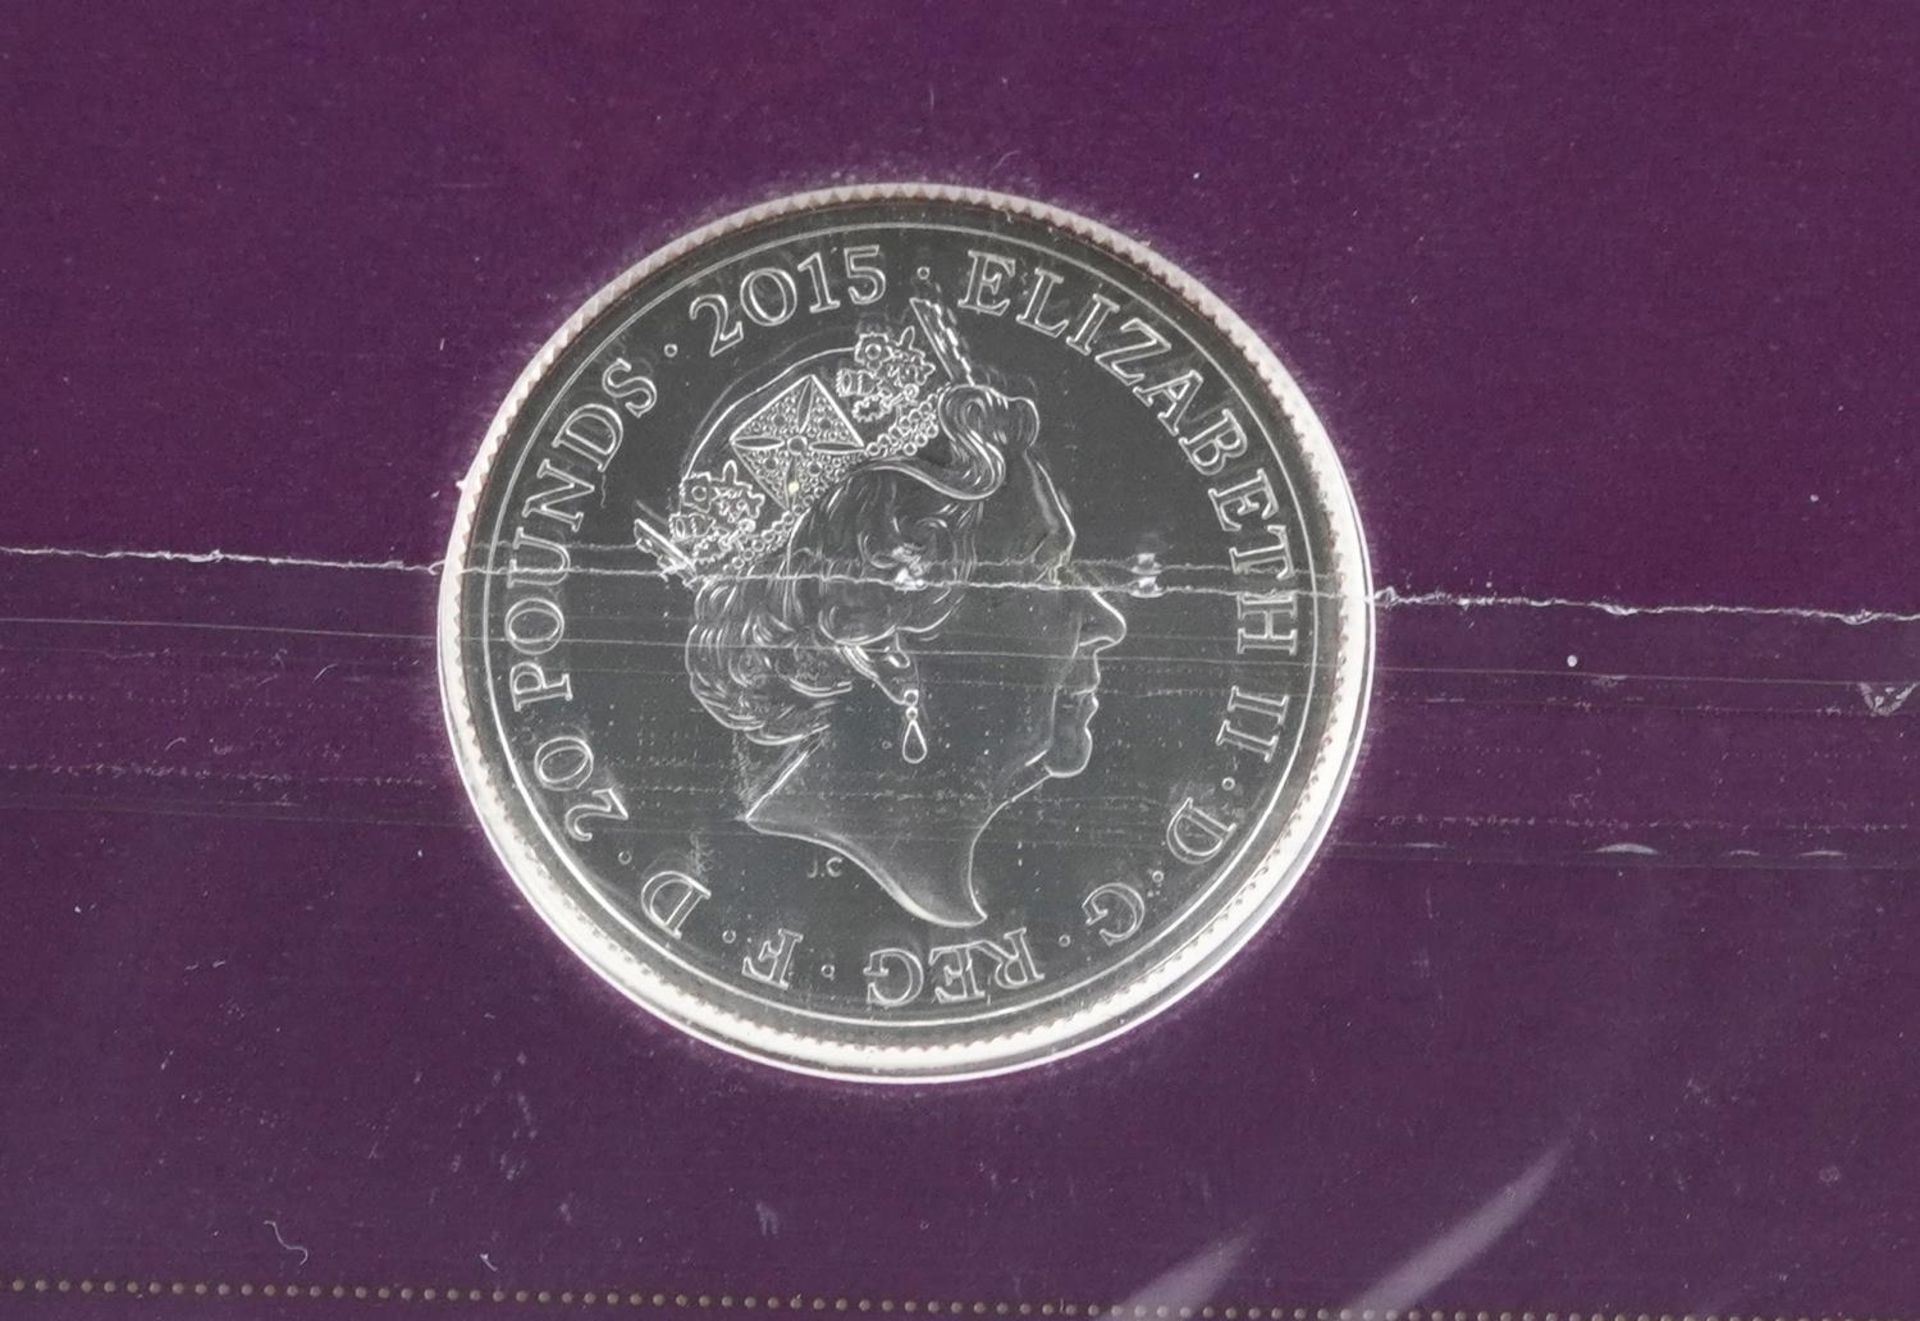 Five Elizabeth II 2015 Longest Reigning Monarch fine silver coins by The Royal Mint - Image 4 of 4